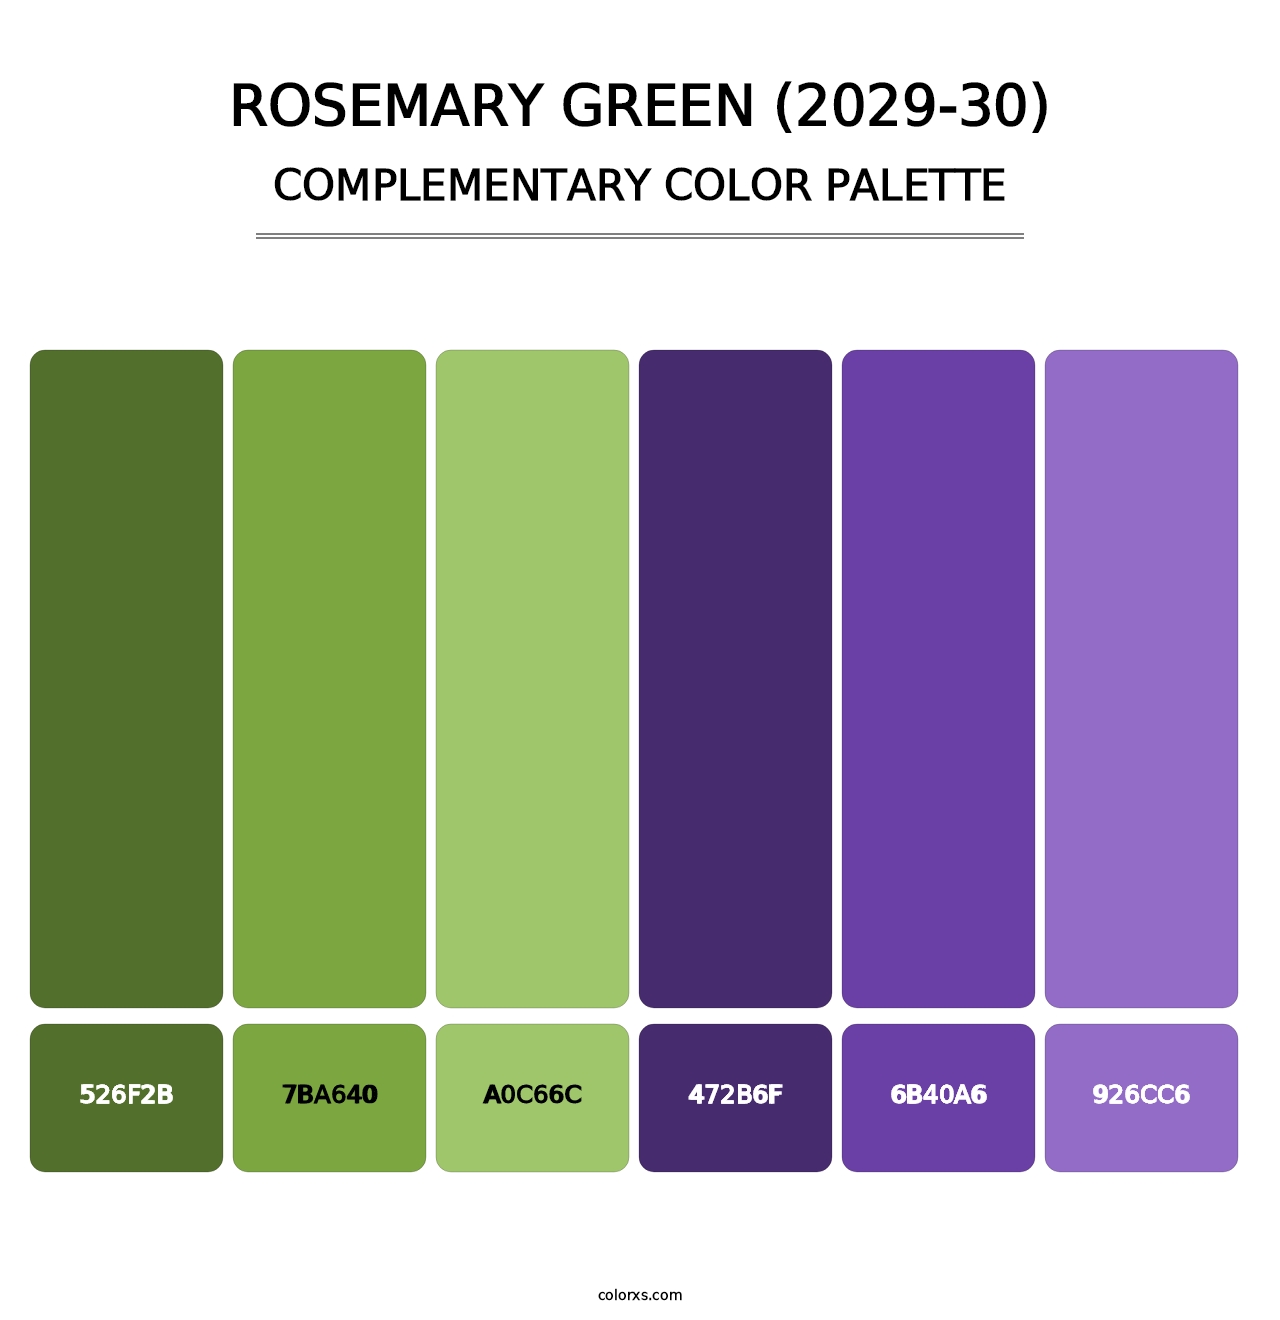 Rosemary Green (2029-30) - Complementary Color Palette